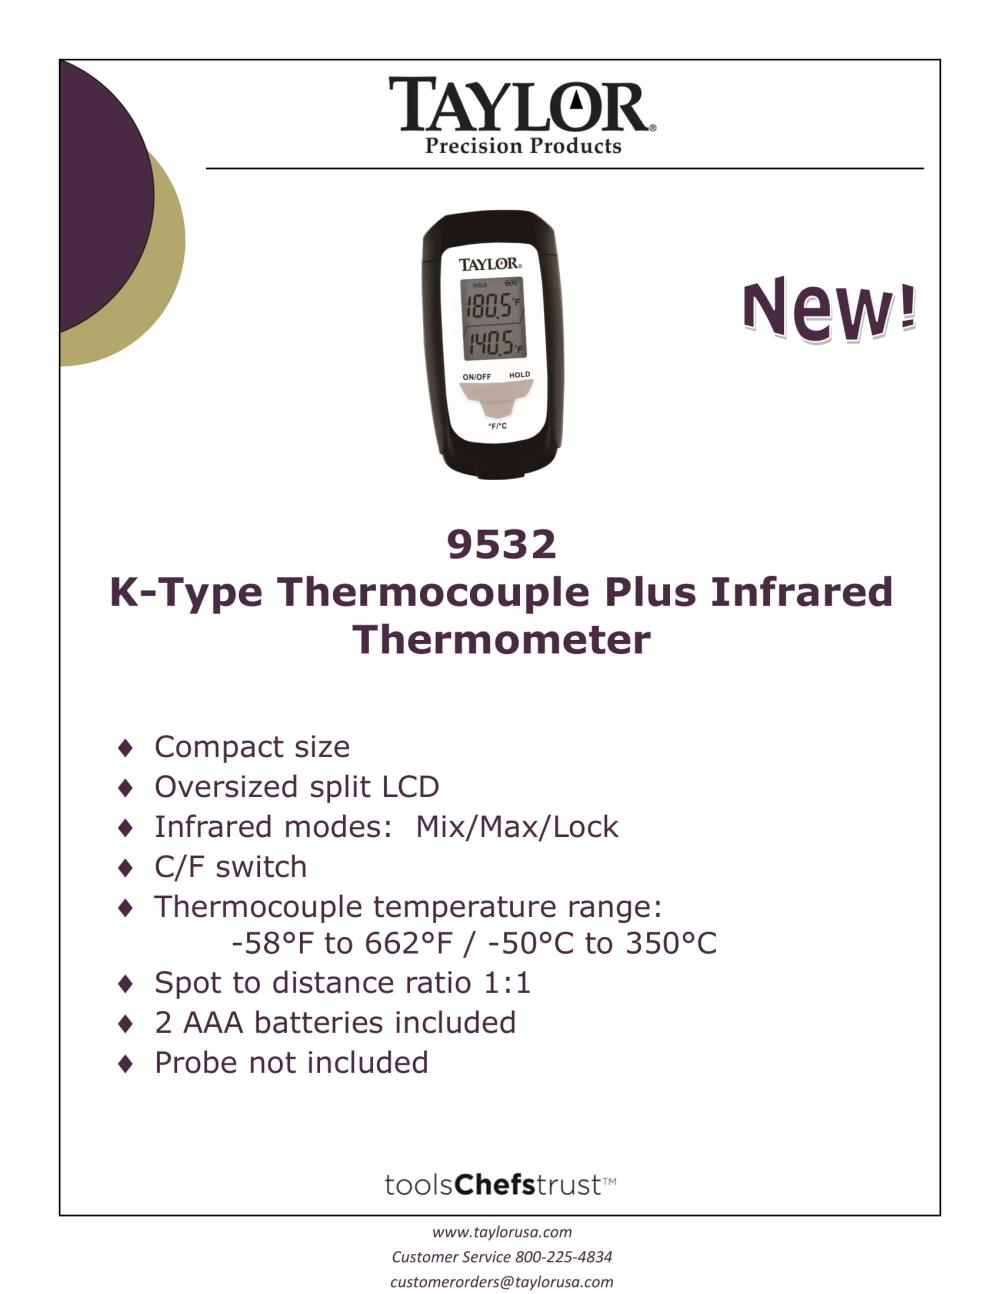 Taylor Infrared Thermometer &Thermocouple Model 9532